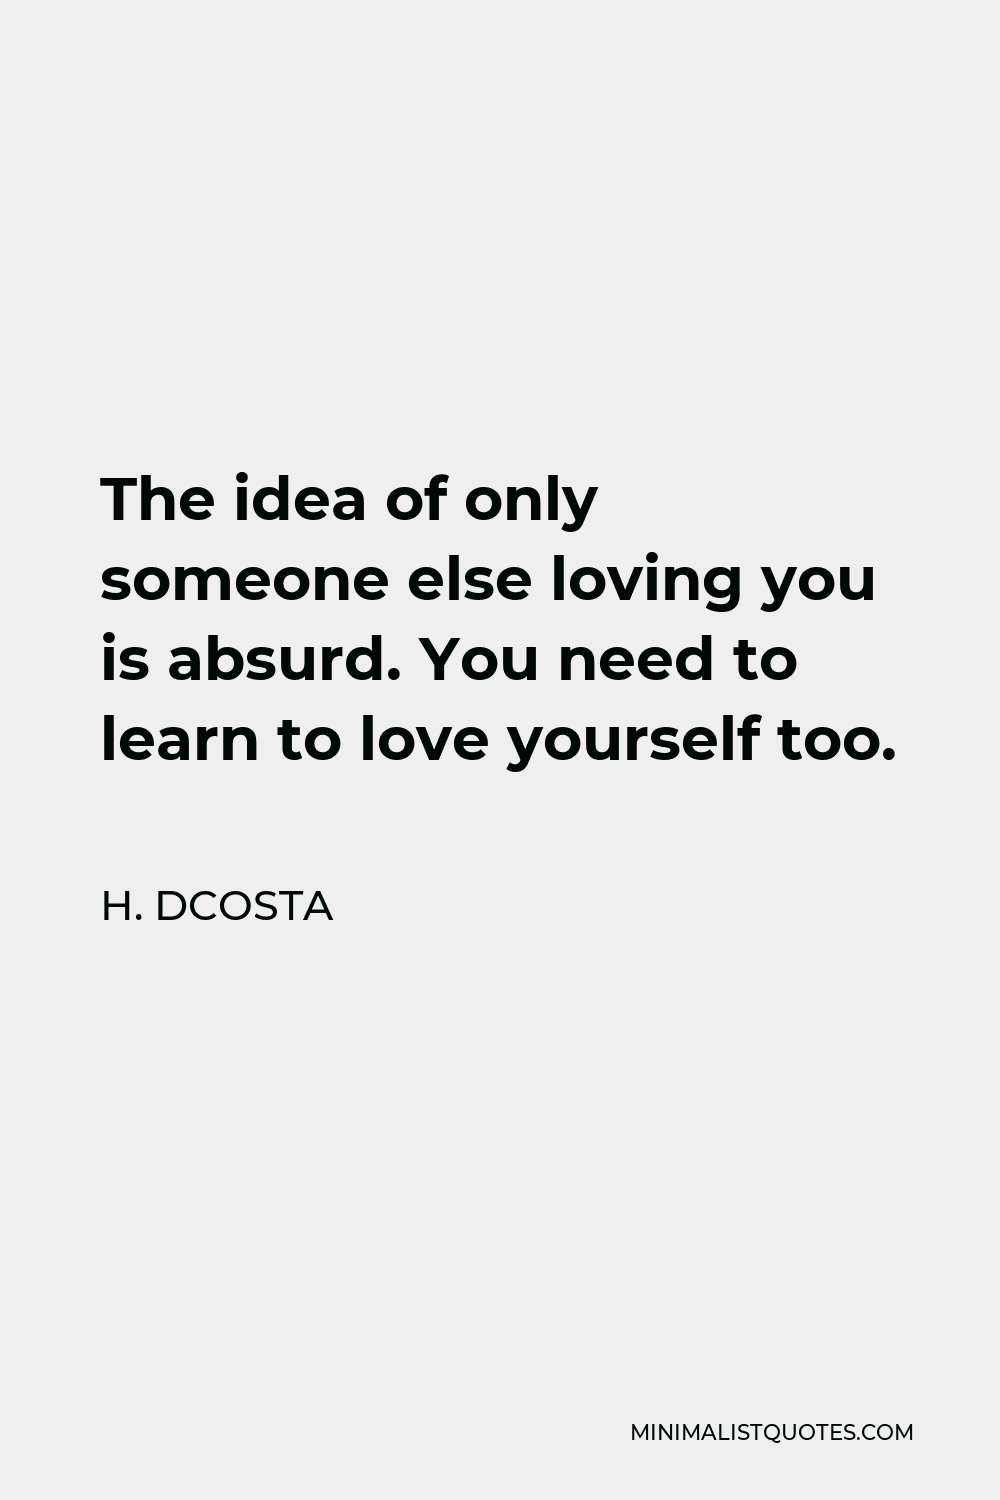 H Dcosta Quote The Idea Of Only Someone Else Loving You Is Absurd You Need To Learn To Love Yourself Too